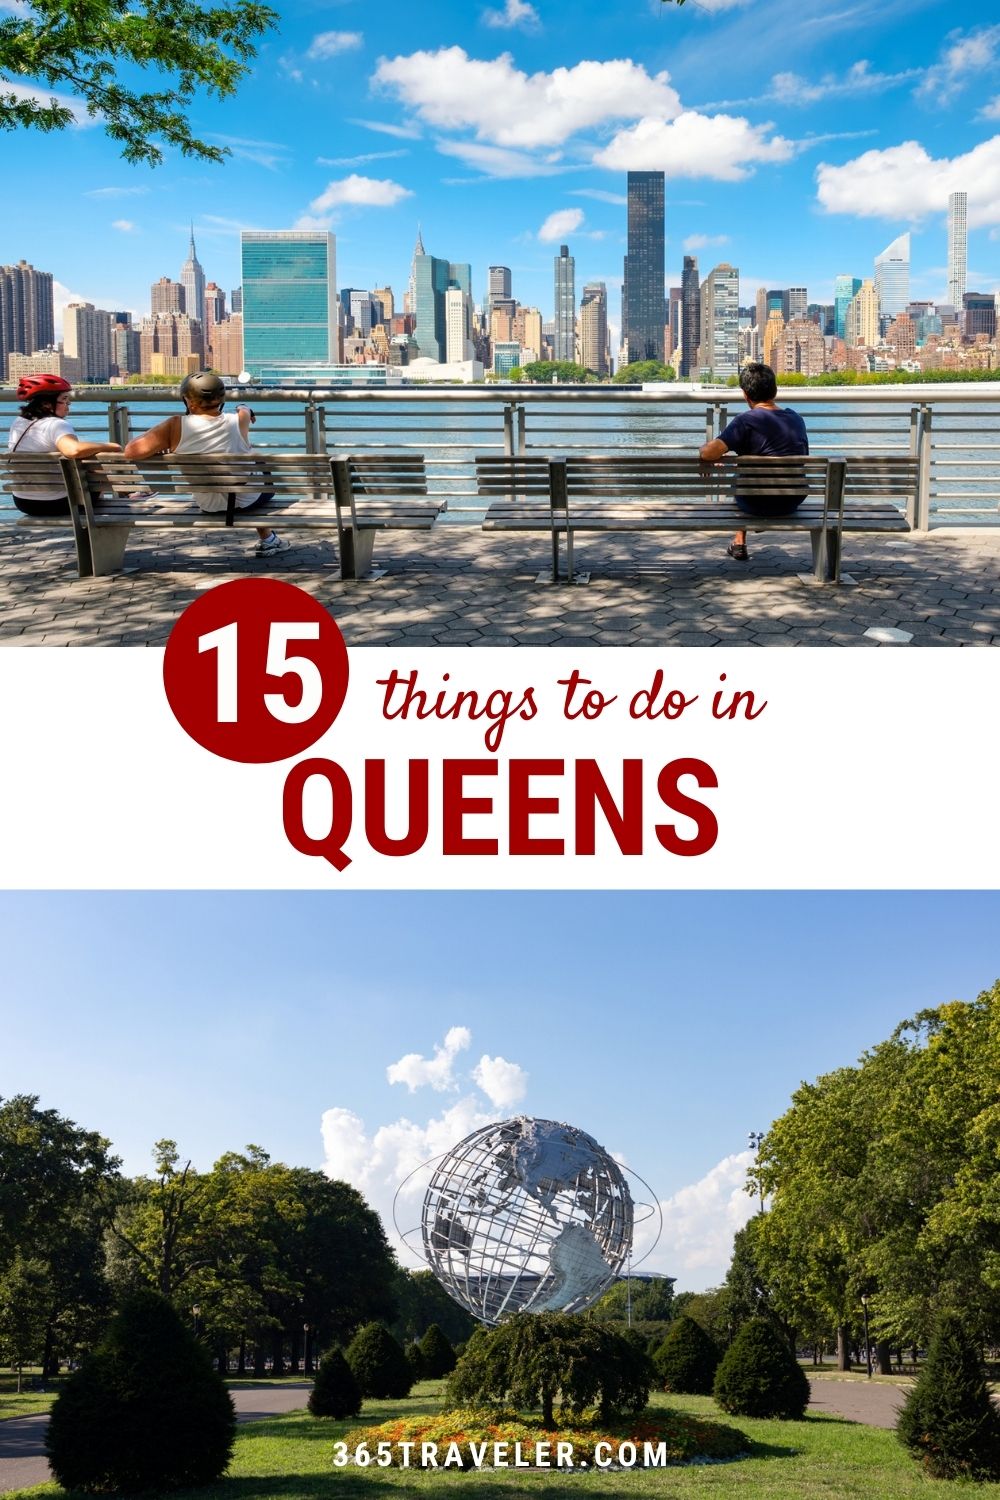 15 AWESOME THINGS TO DO IN QUEENS YOU CAN'T MISS